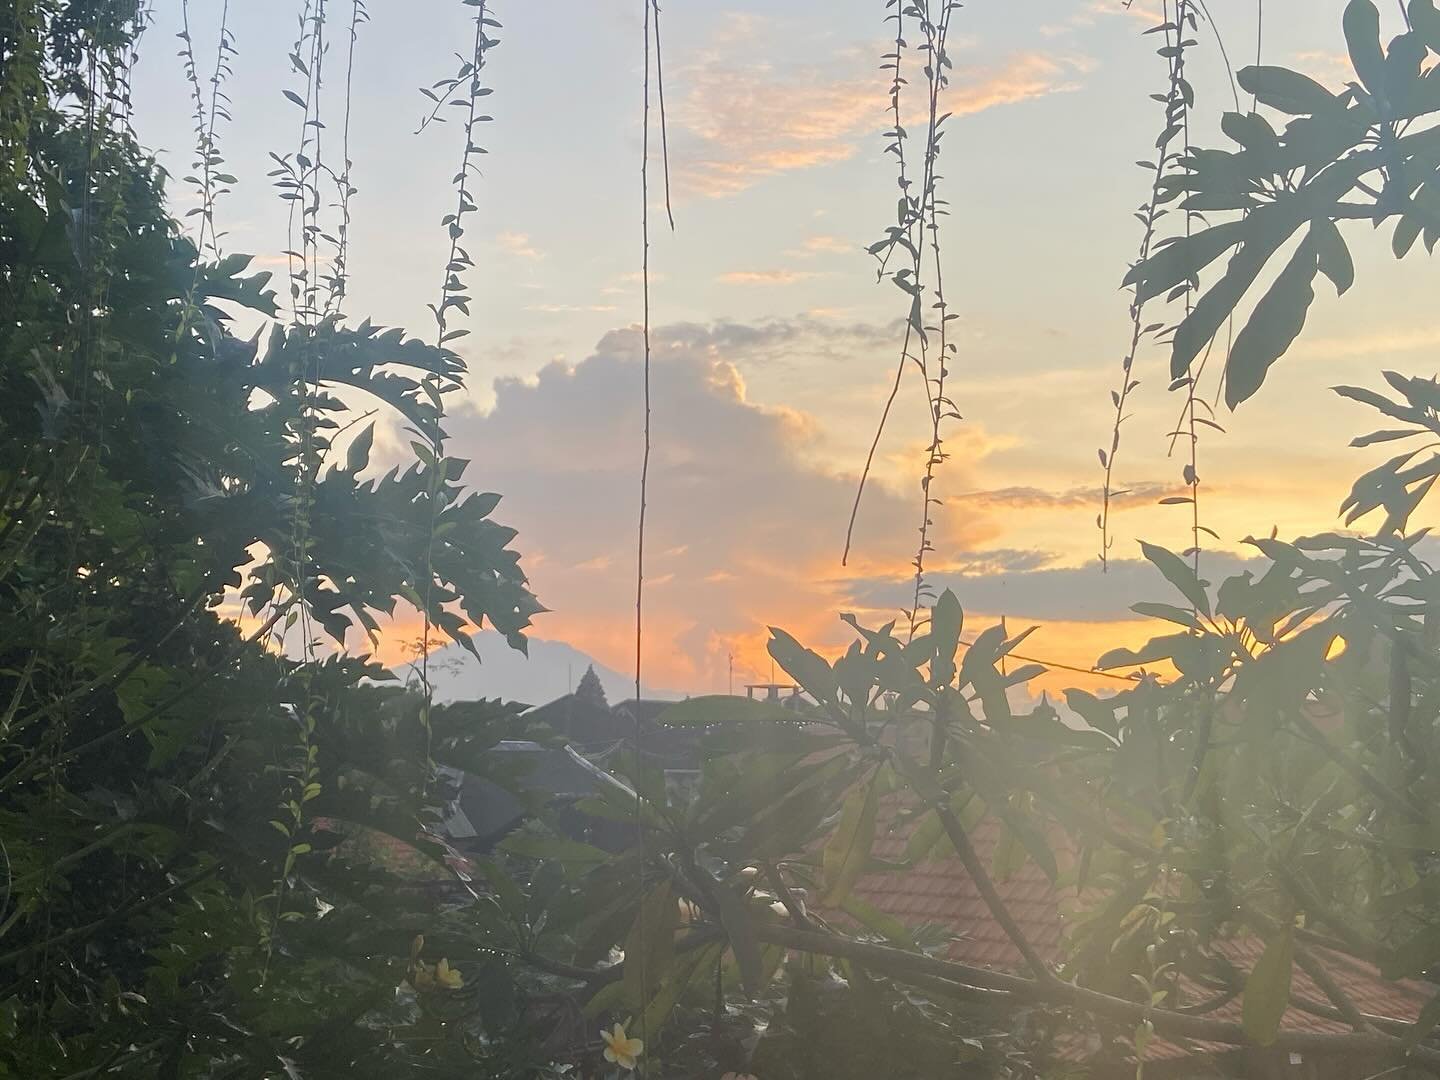 Fell asleep last after an unexpected epic gamelan &ldquo;concert&rdquo; at the community area right next door to my room and I woke to this sunrise this morning and a view of the volcano! And that was without any filters! Amazing. When I am just quie